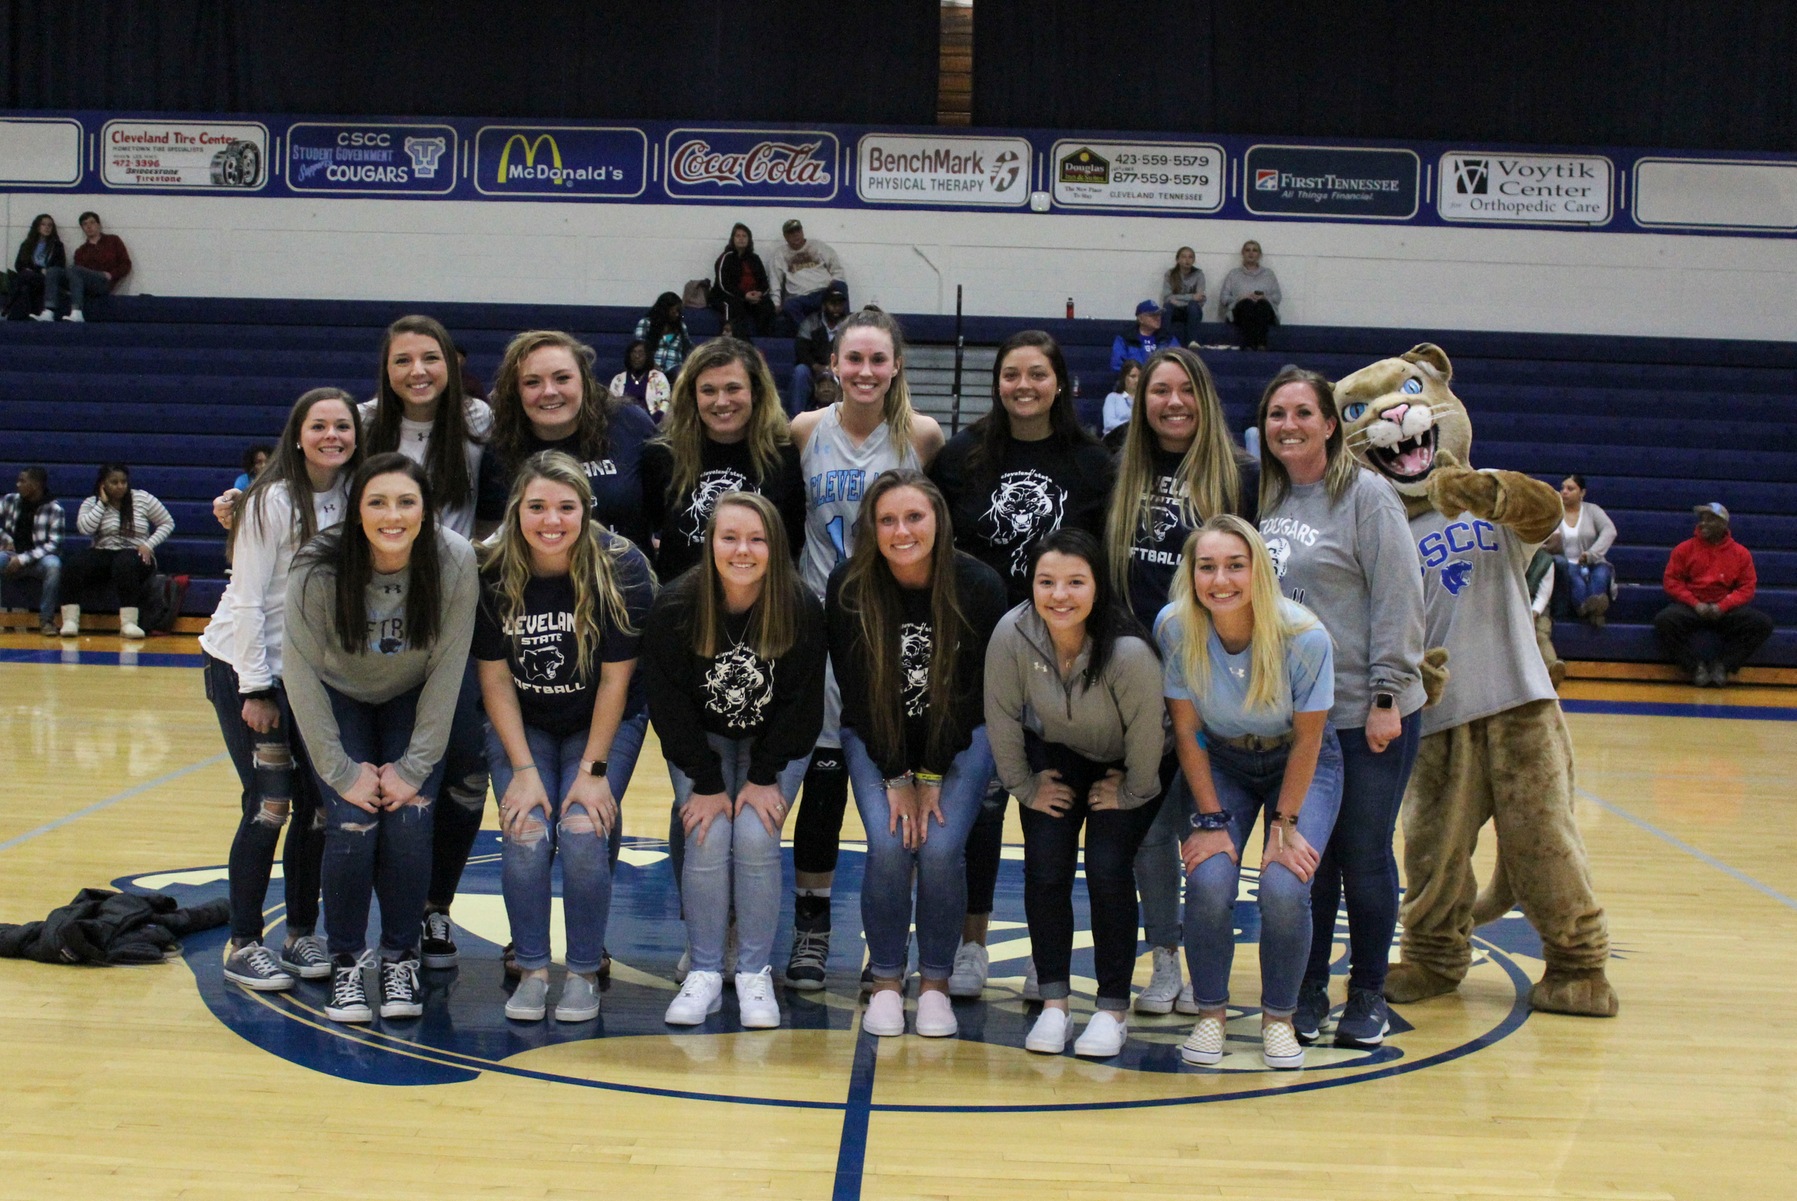 2018 State Runner-Up Lady Cougar Softball Team Recognized